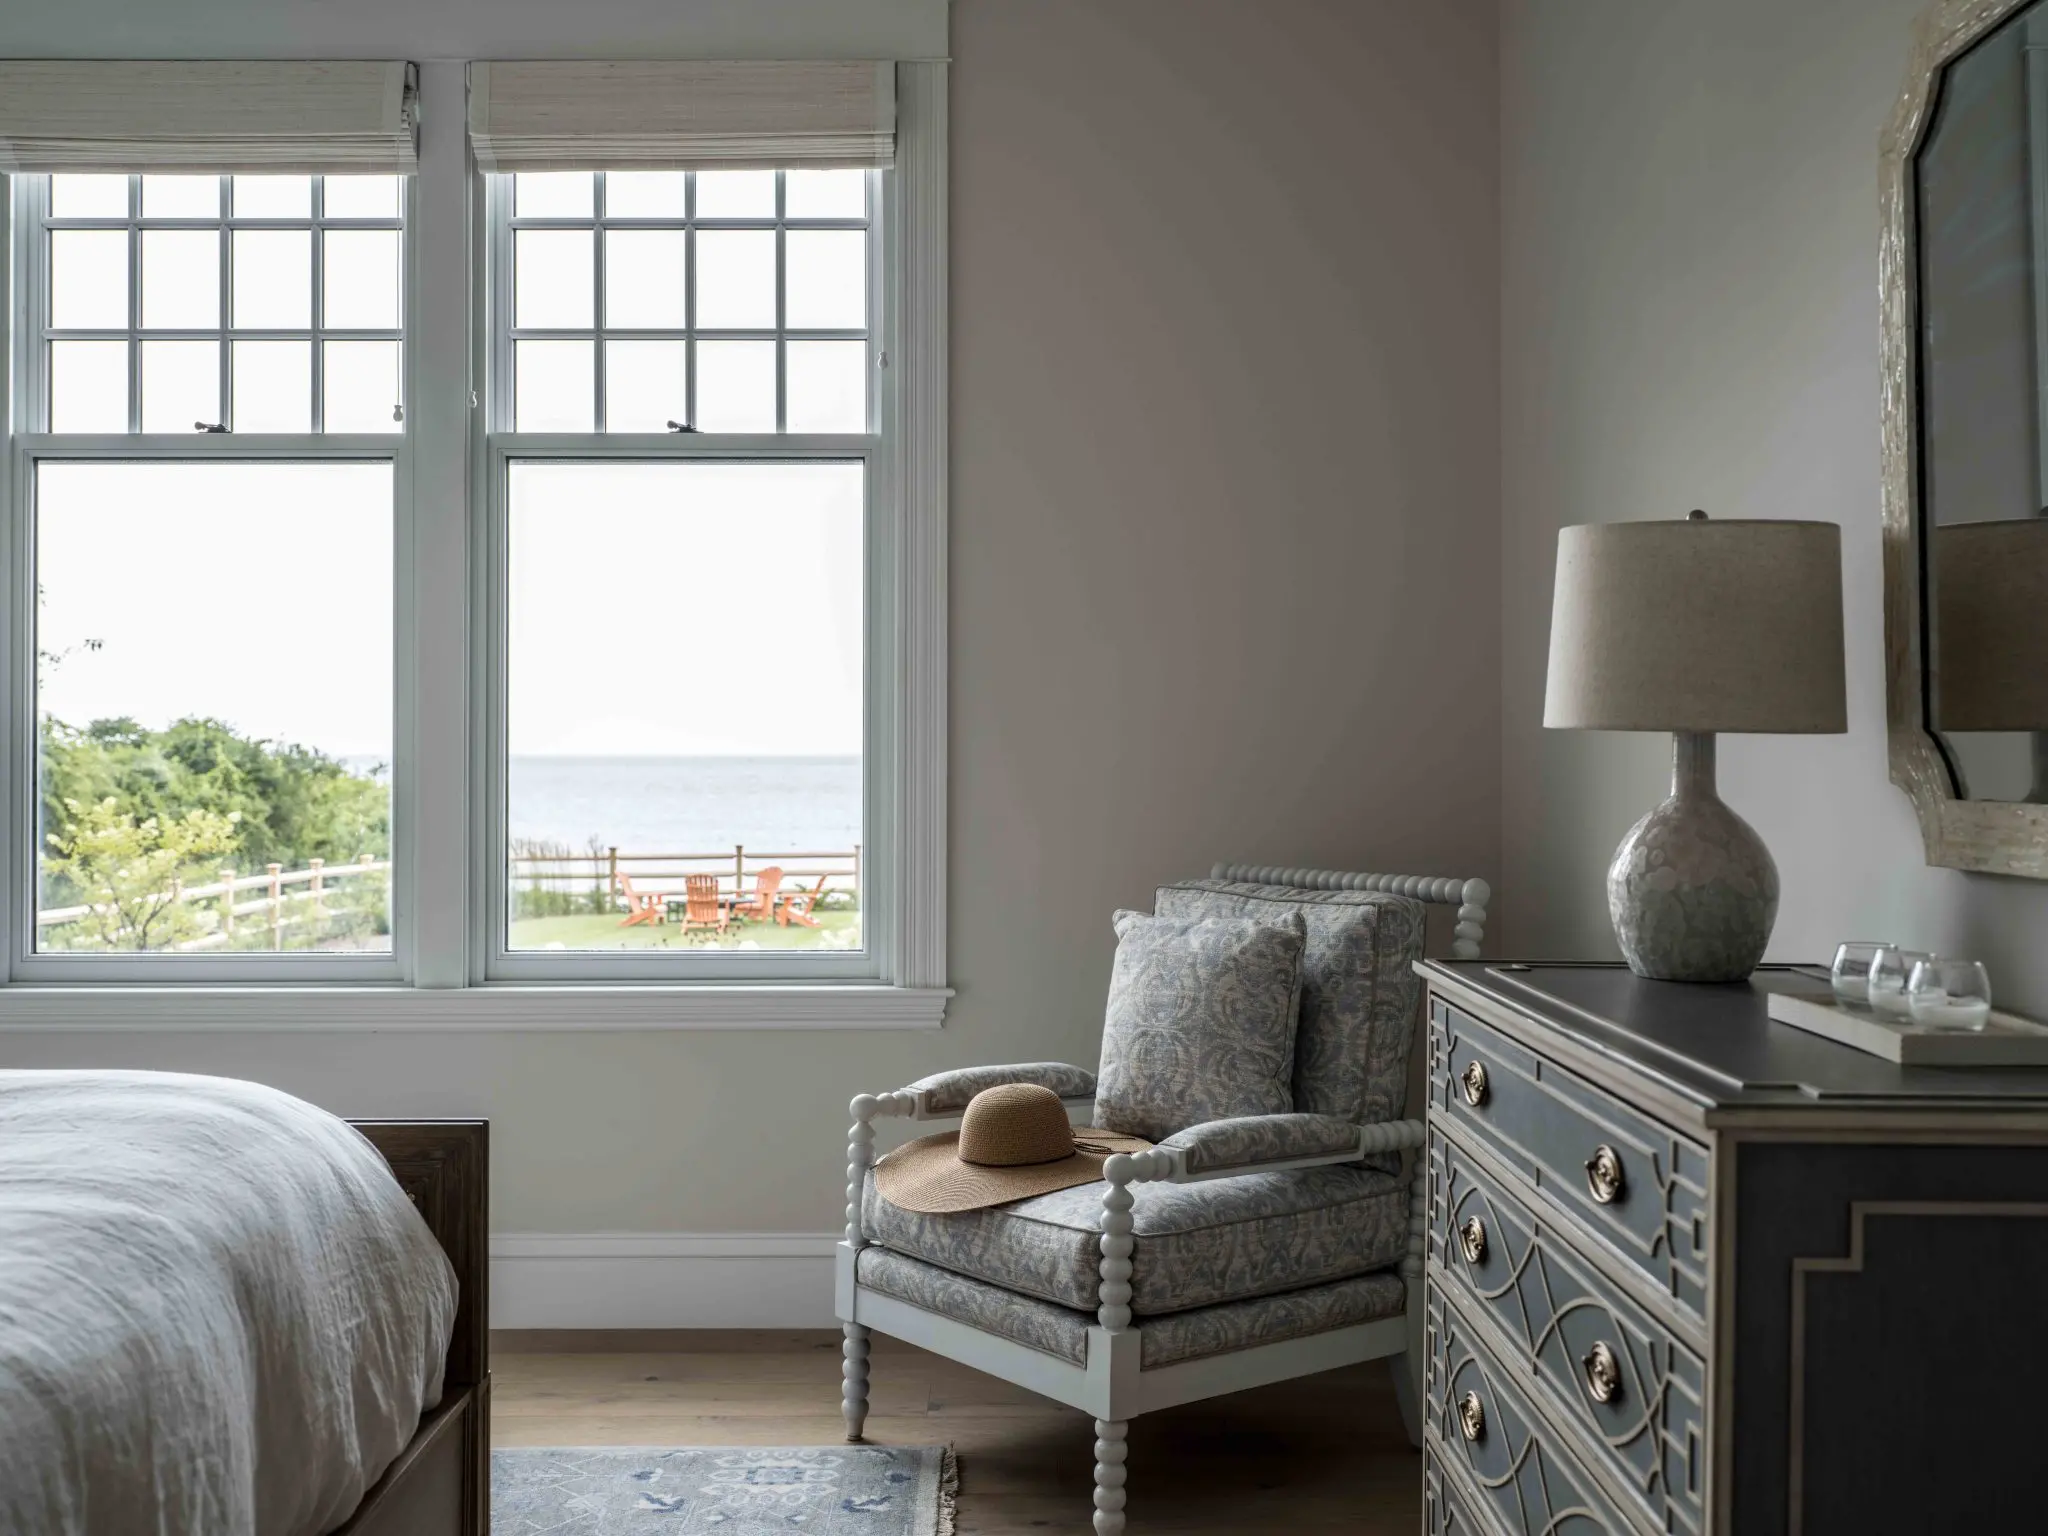 Ocean views from the primary bedroom in this Maine home